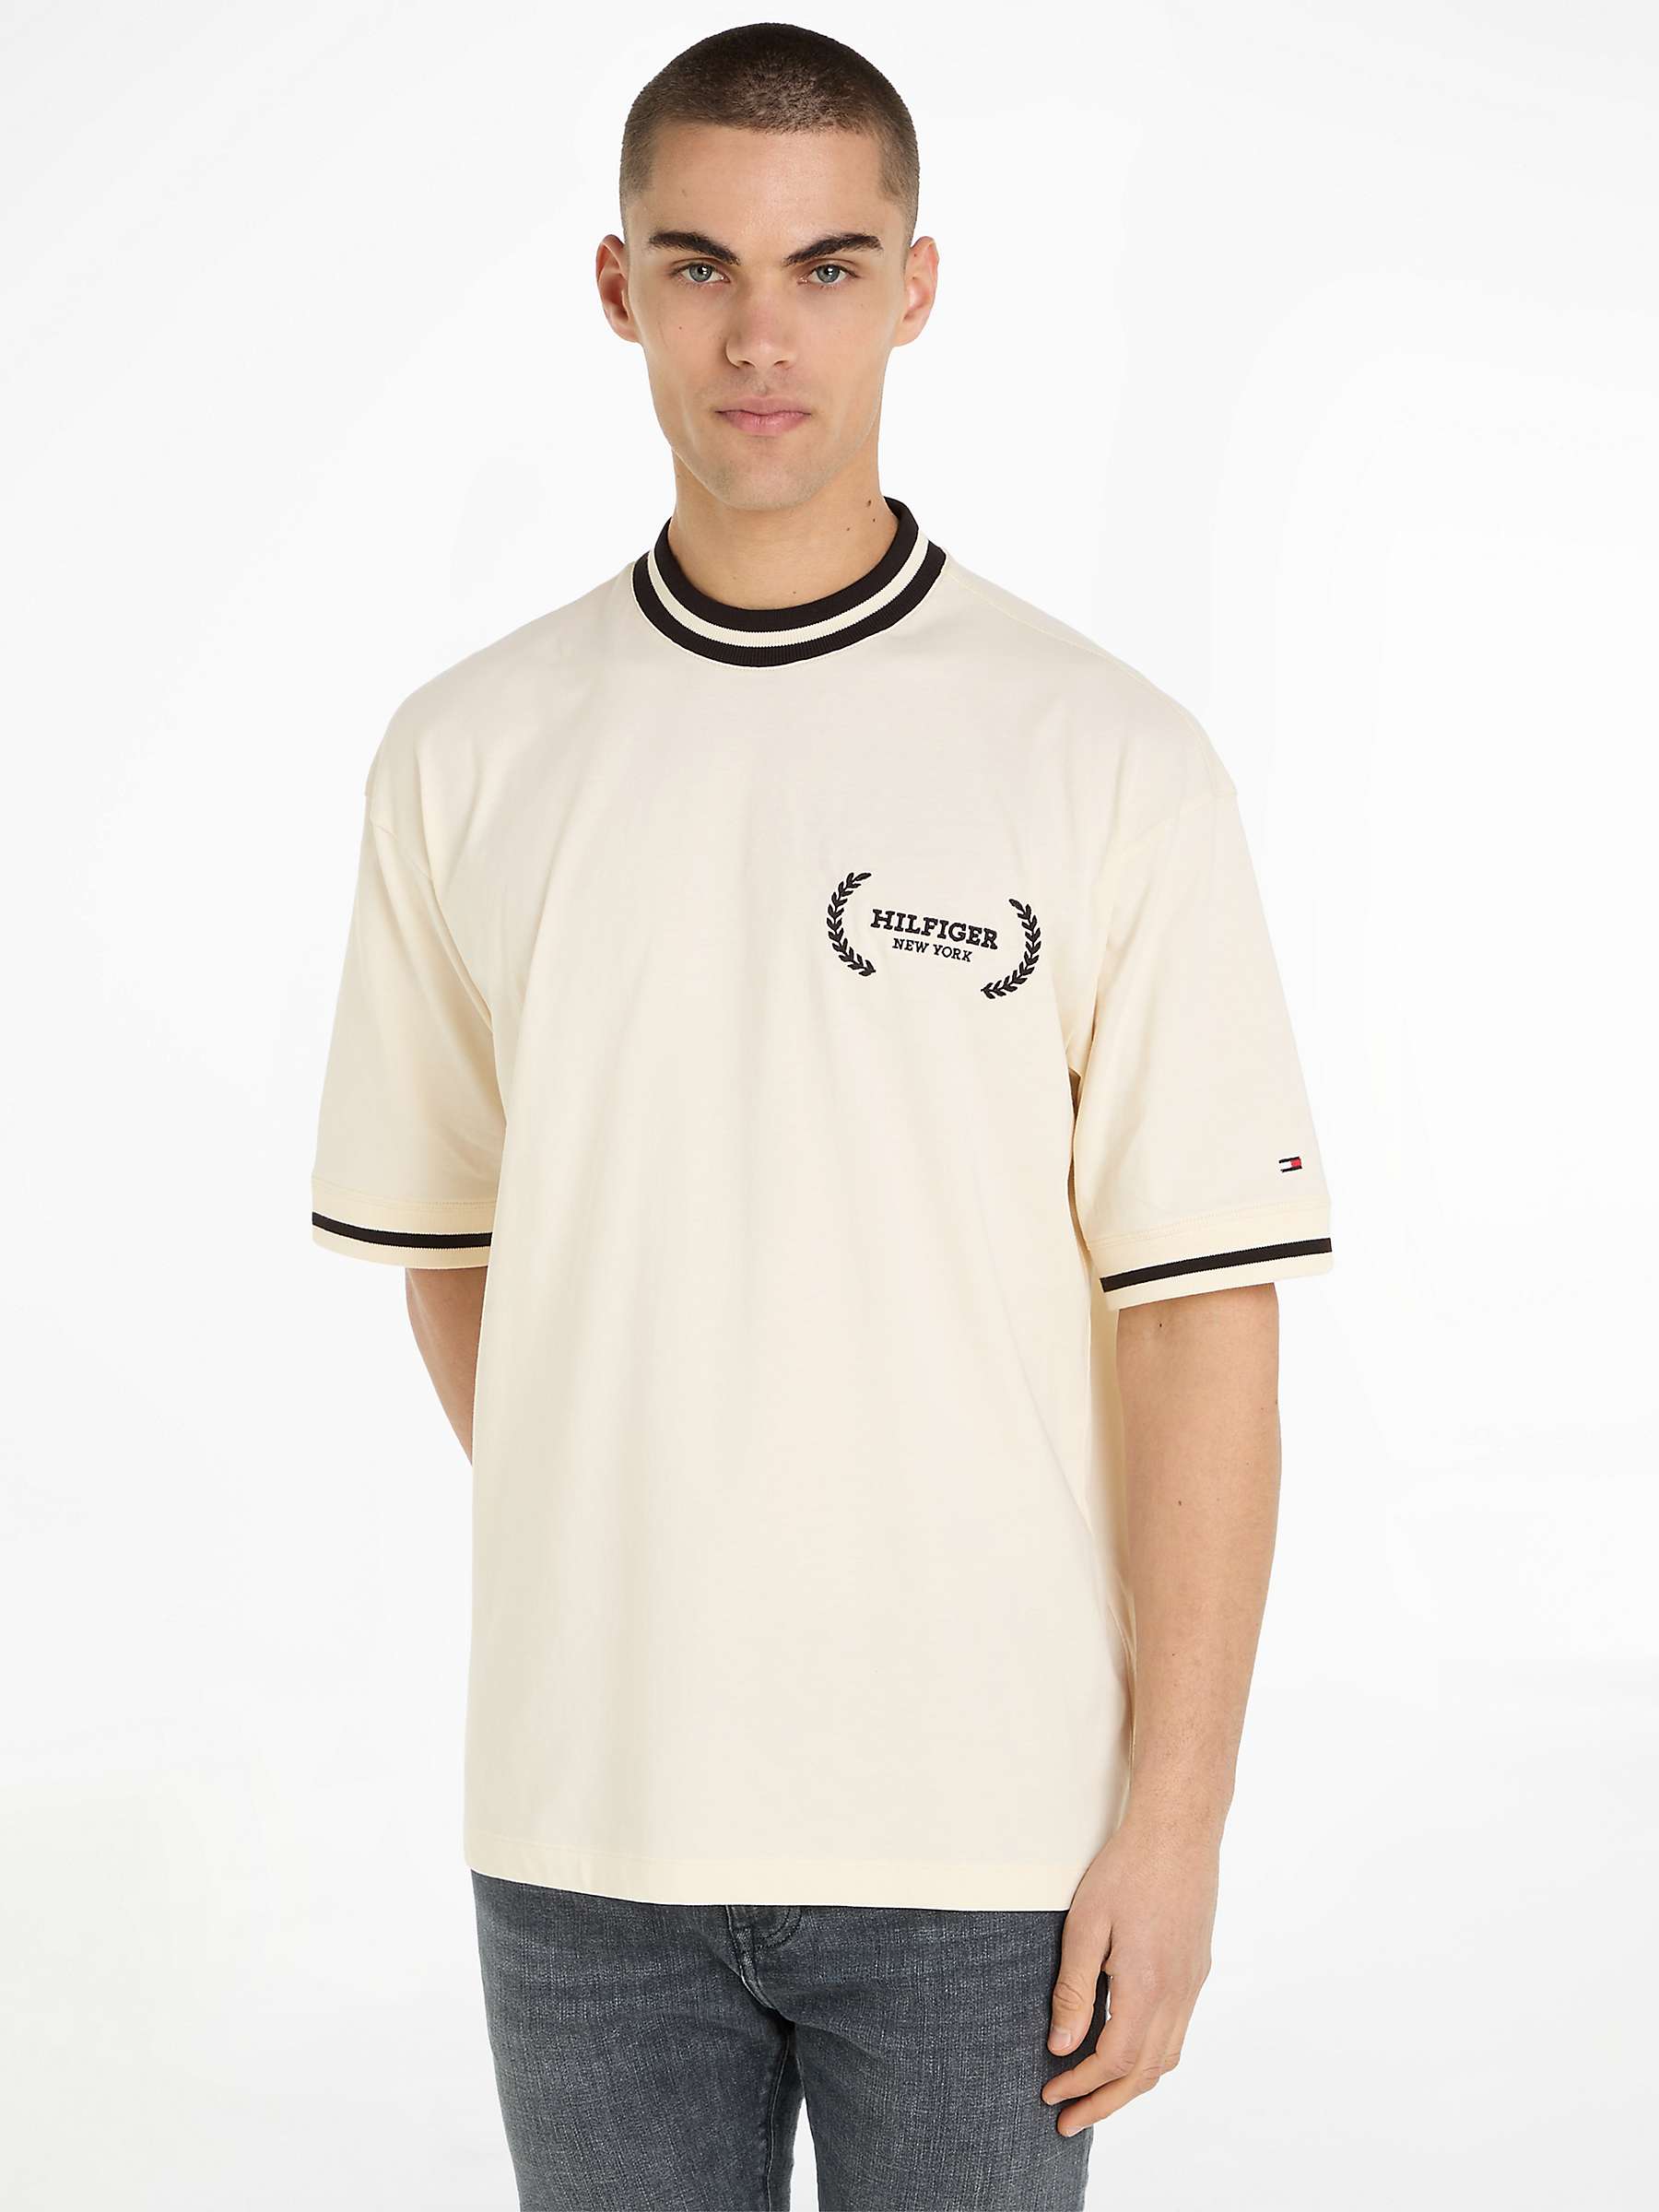 Buy Tommy Hilfiger Tipped Cotton T-Shirt, Calico Online at johnlewis.com